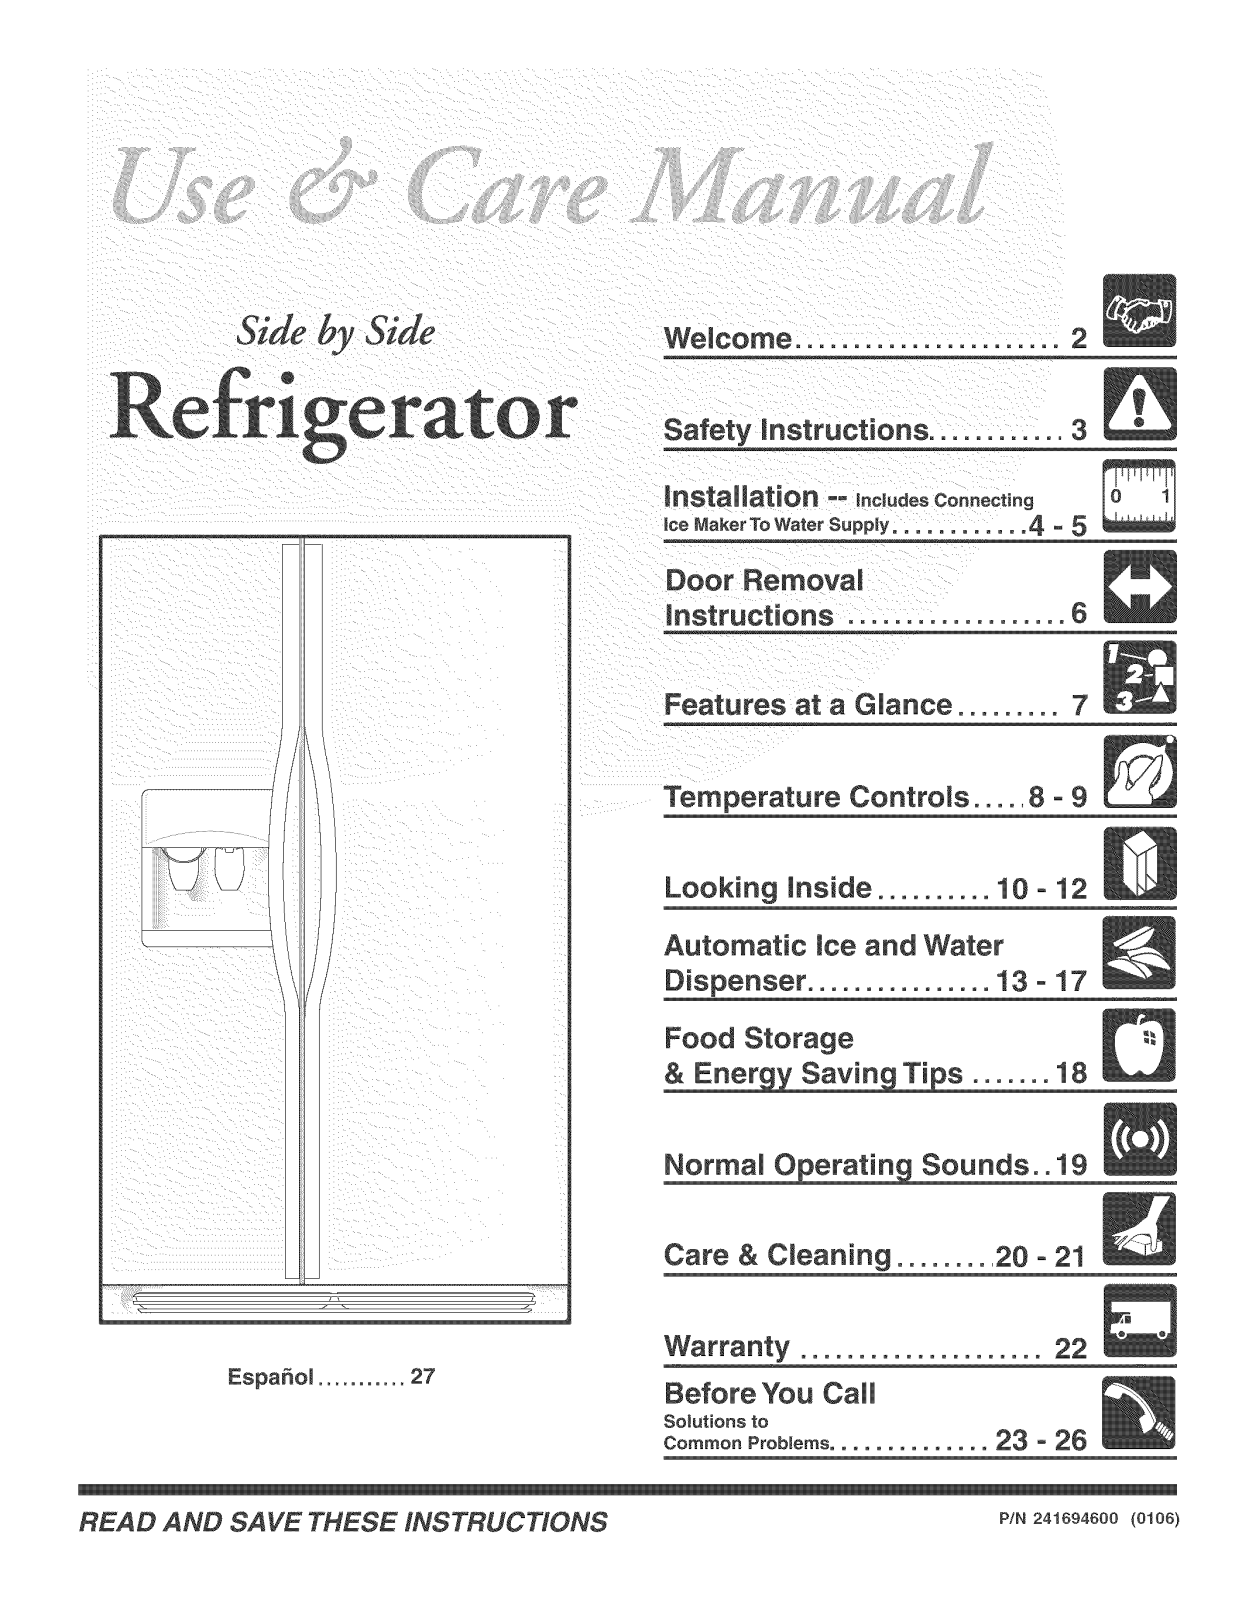 Frigidaire PHSC39EESS0, GHSC39ETEW0, GHSC39ETES0, GHSC39ETEB0, GHSC39EEPW0 Owner’s Manual